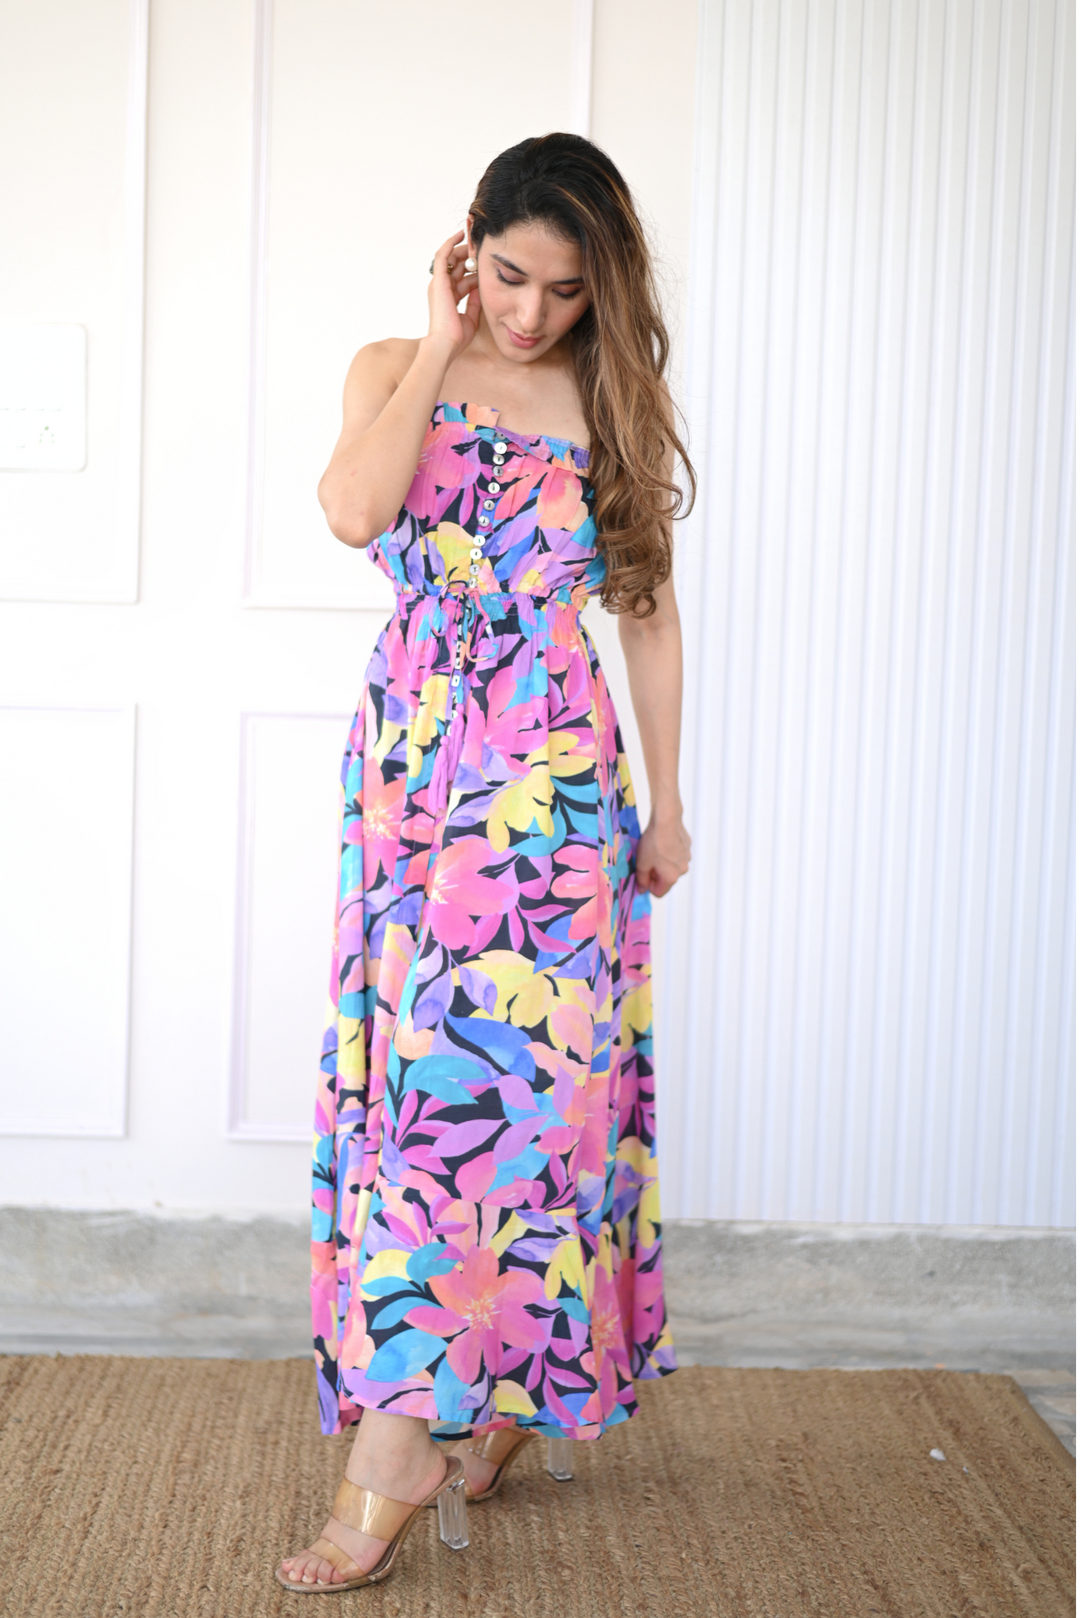 The Venice Floral Dress pink and blue